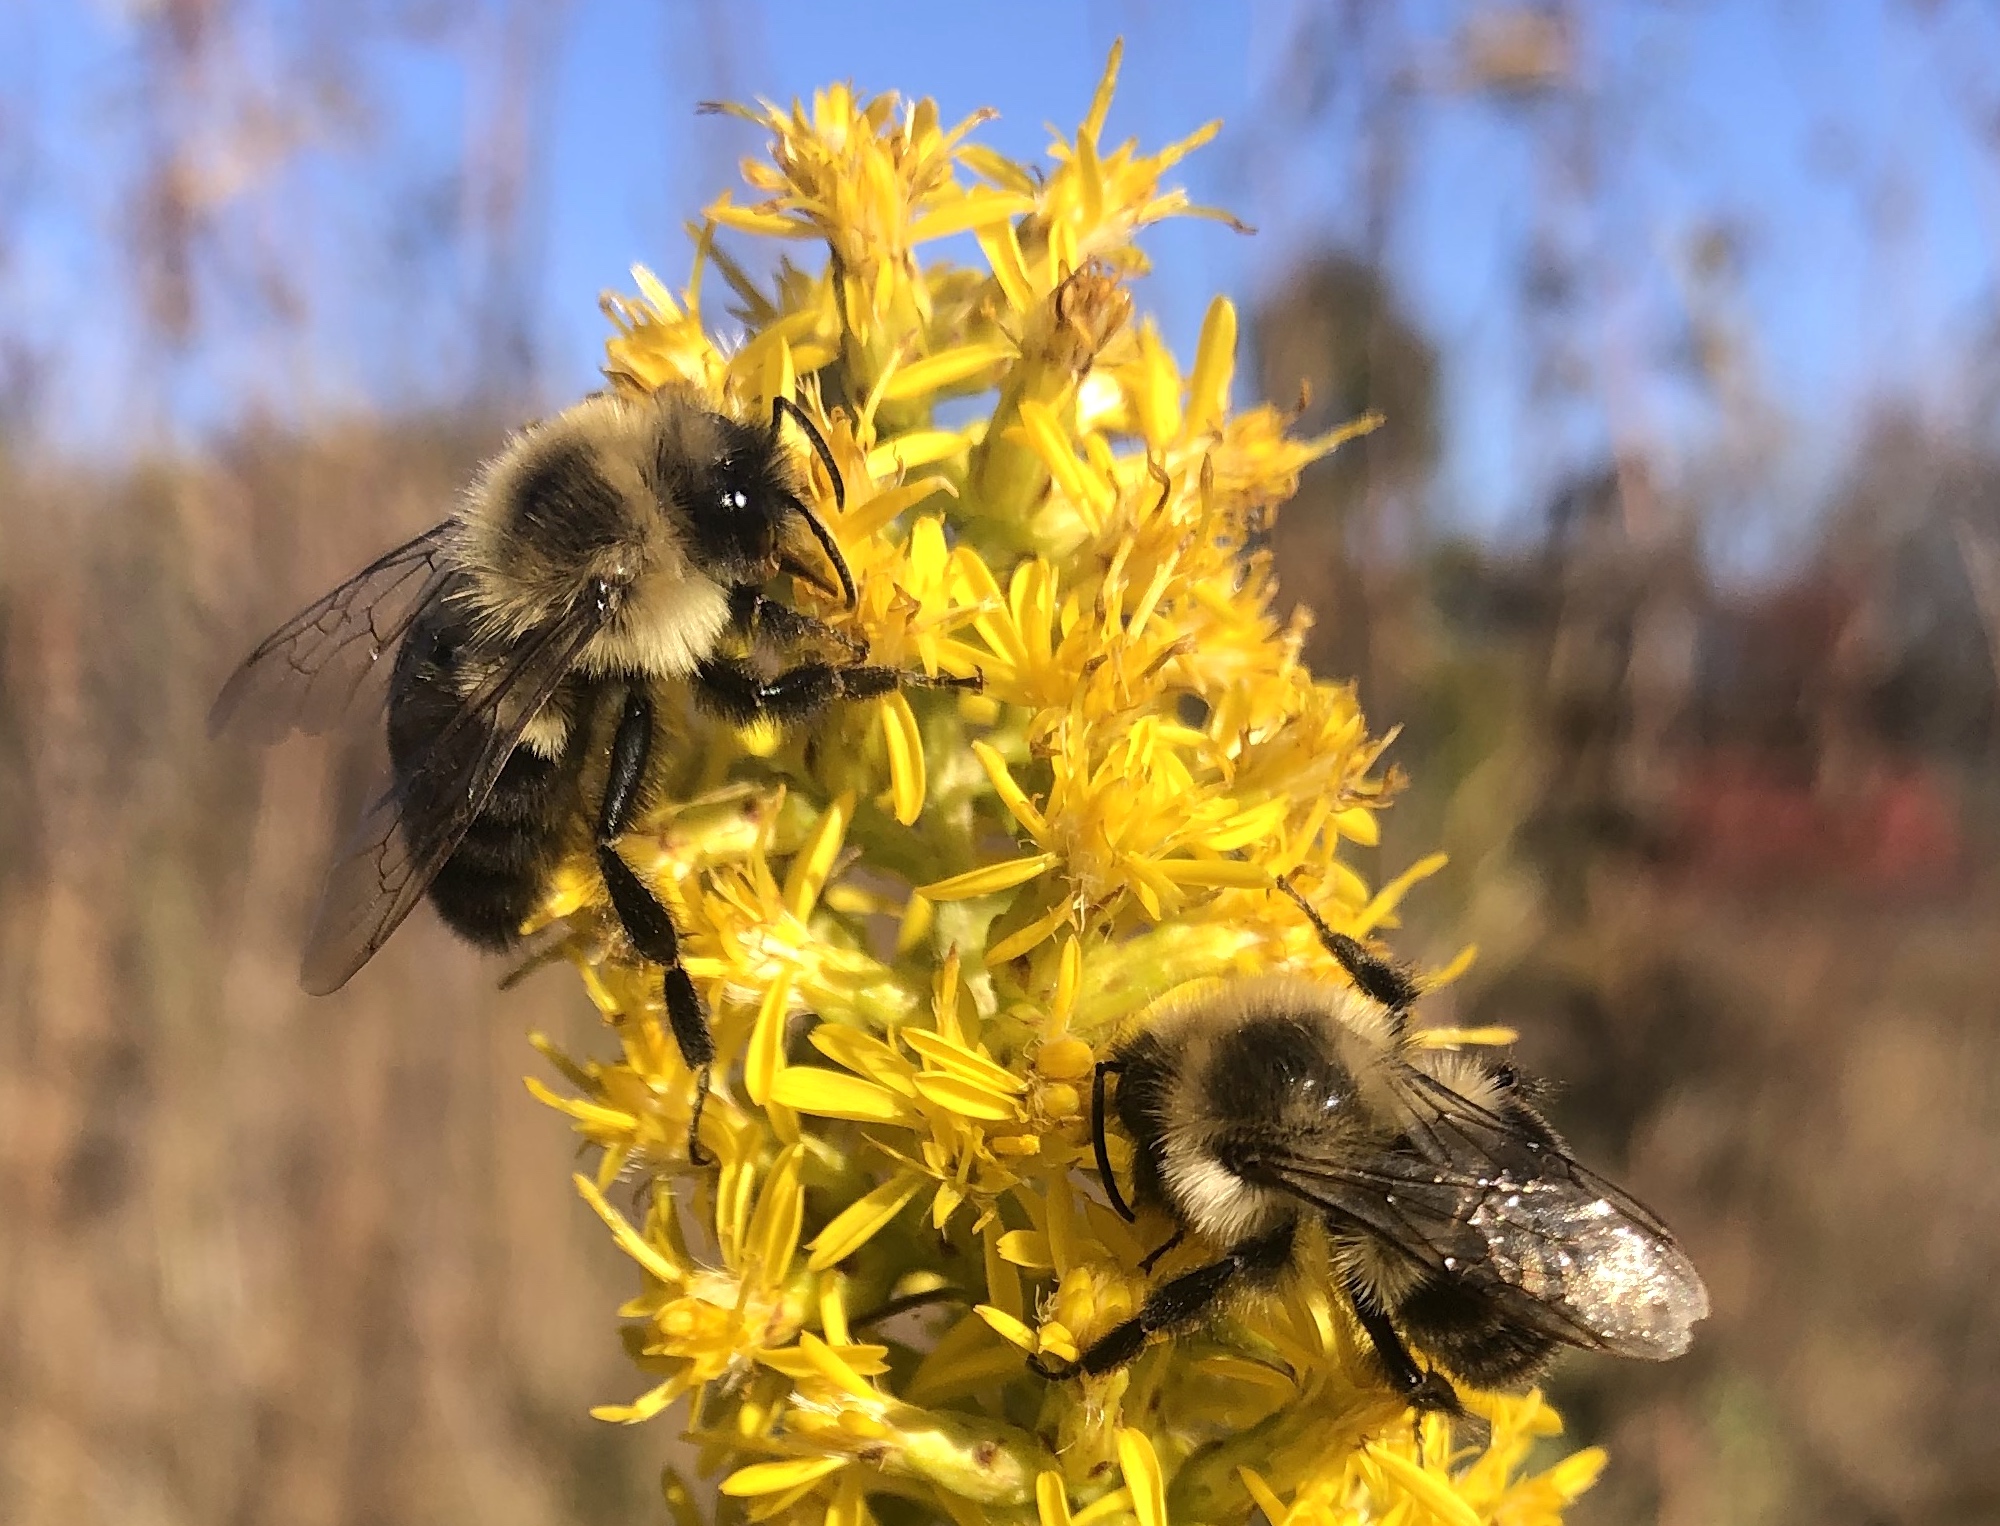 Bumblebees on Showy Goldenrod on October 13, 2020.